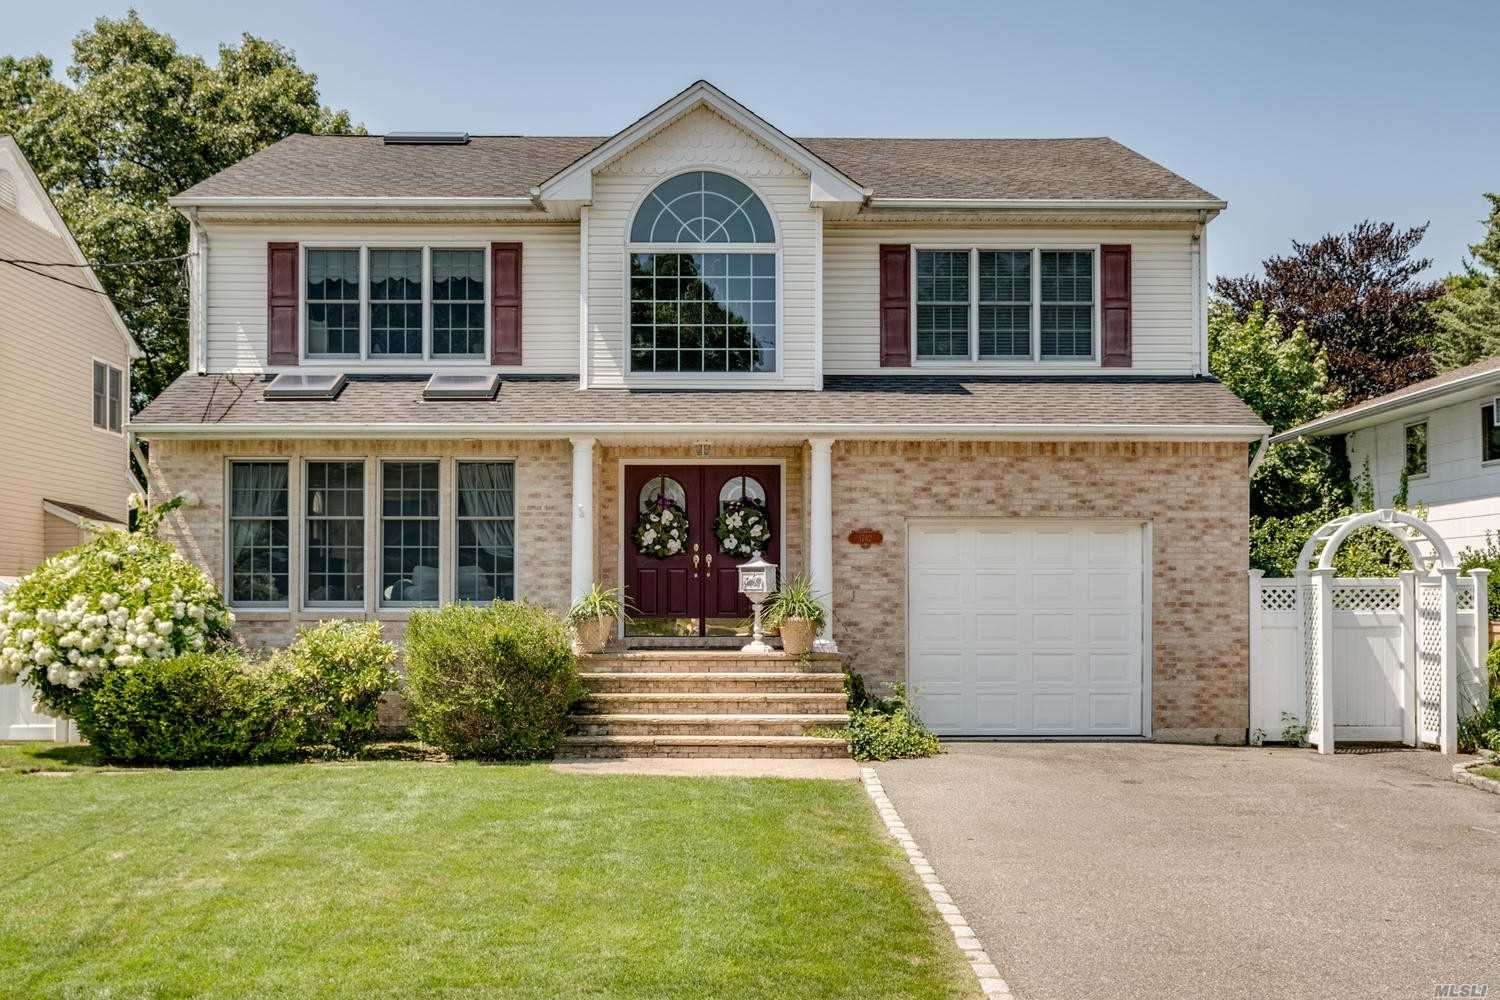 Gorgeous Georgian Colonial Built By Prestigious Builder In 2004. Stately Vaulted Entrance Foyer Leads To Large Sun-Drenched Living Room Area & Formal Dining Room. Custom Eat-In Kitchen W/Granite & Stainless Appliances. Family Room W/Fireplace Leads To Stunning Private Entertainers Yard W/Ig Pool. Huge Master Bedroom W/Vaulted Ceilings W/2 Walk-In Closets & Large En-Suite W/Jetted Tub. 3 Add Bedrooms & A Full Bath On Same Level.Full Finished Basement W/Ose. Attached Garage. A Truly Stunning Home.